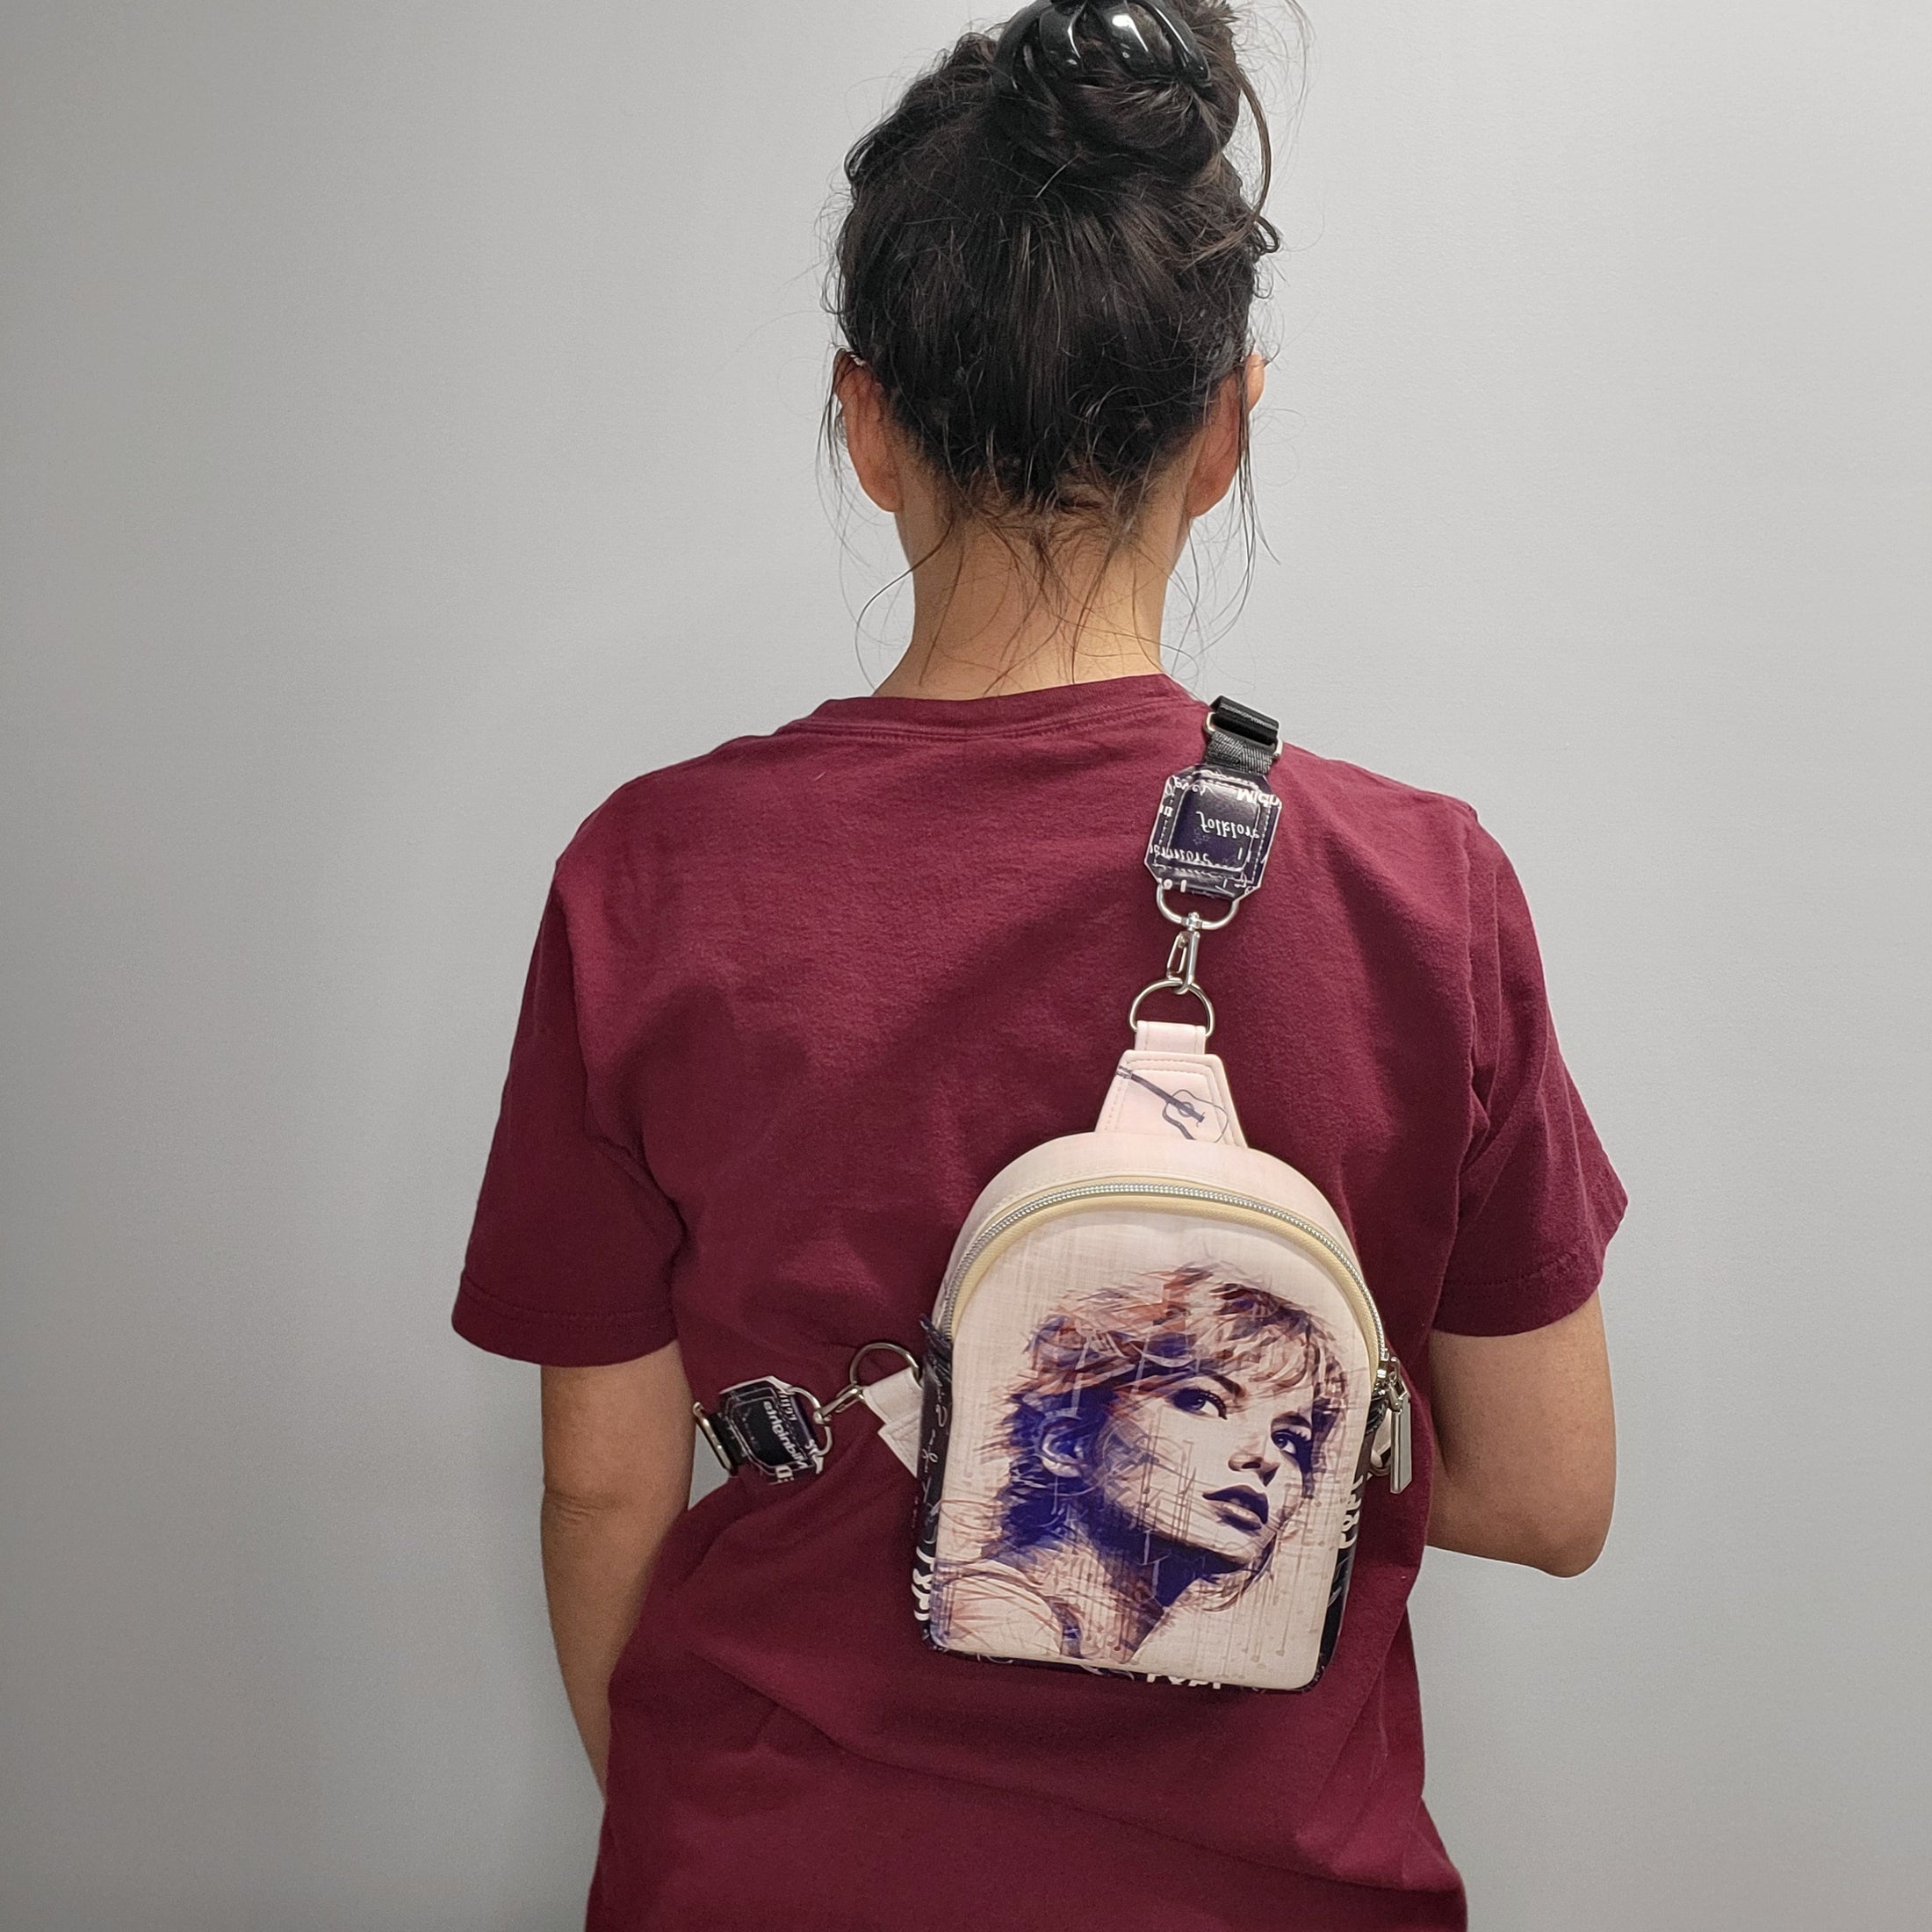 Person wearing the Swiftie Sling bag on their back.